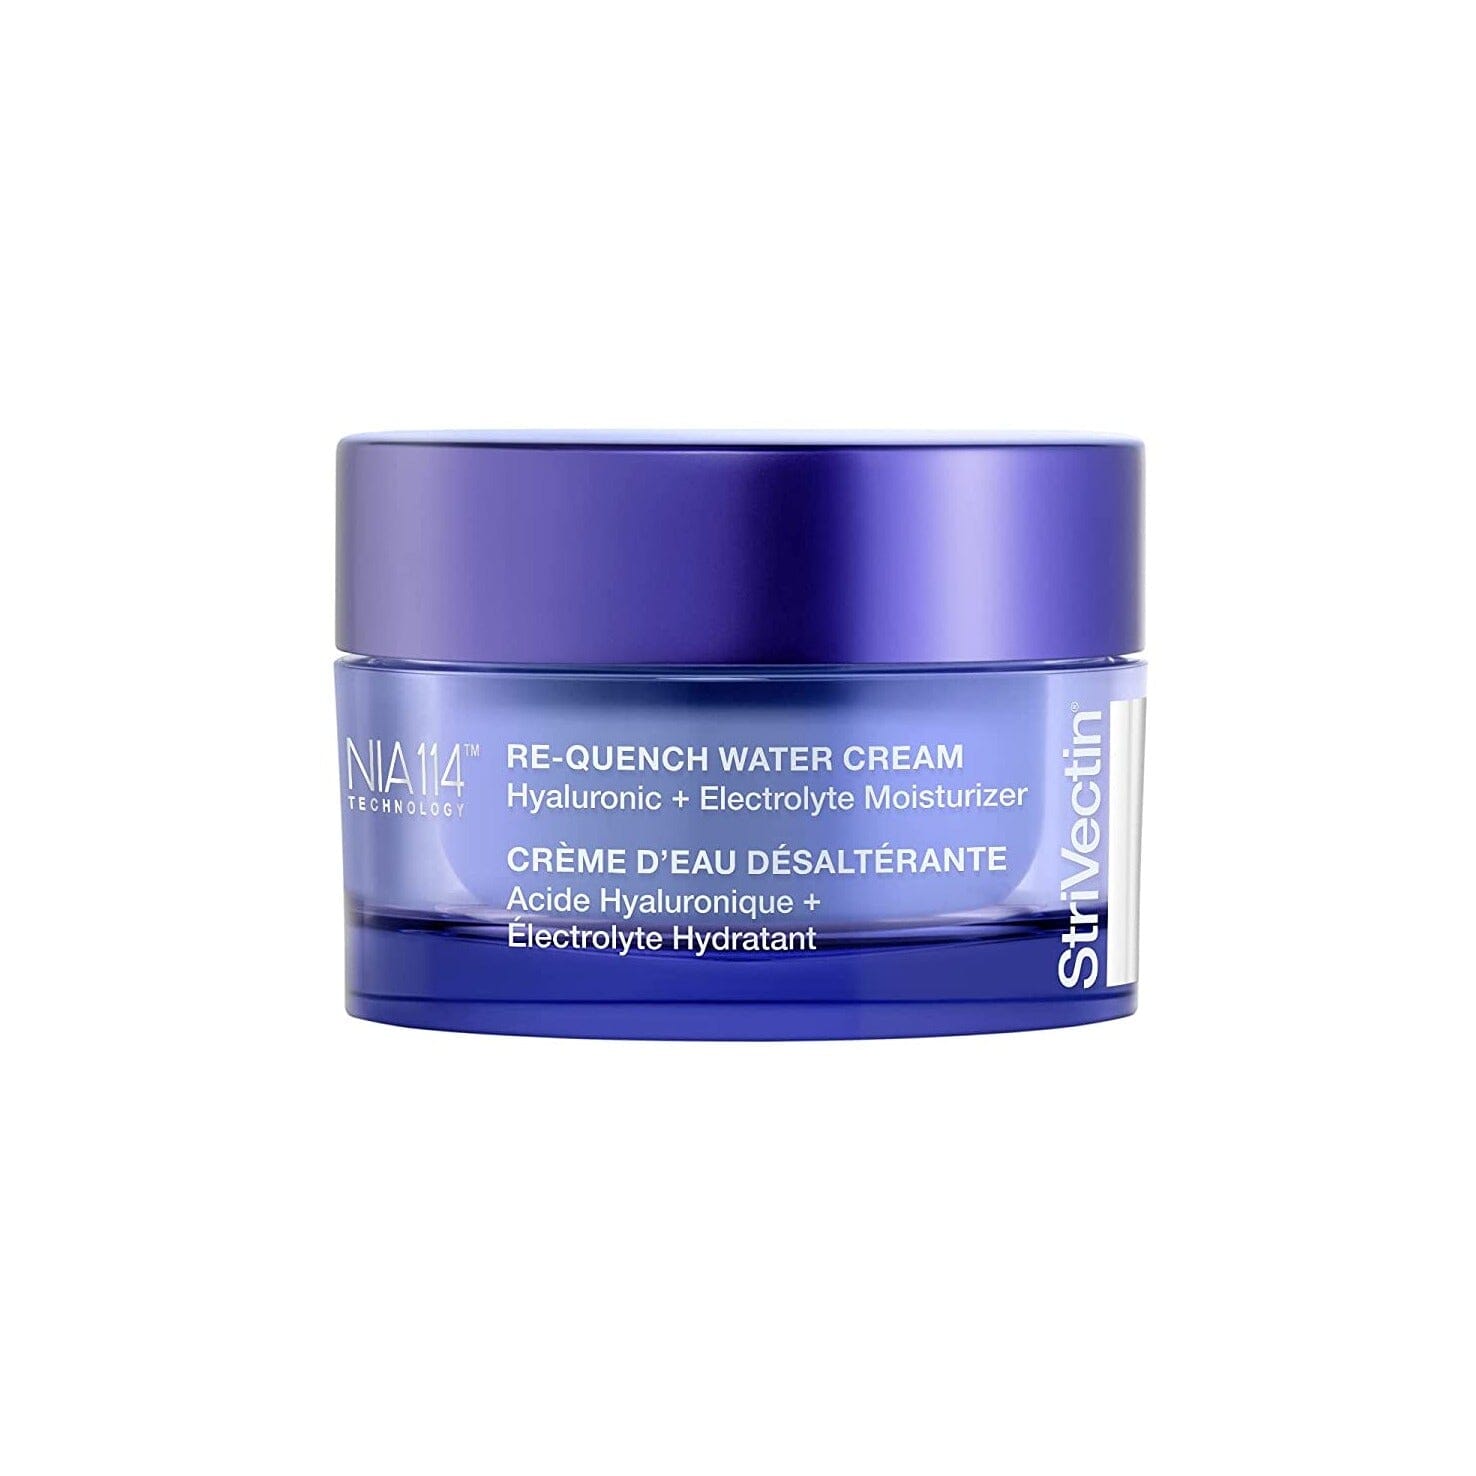 StriVectin Re-Quench Water Cream Hyaluronic + Electrolyte Moisturizer StriVectin 1.7 oz. Shop at Exclusive Beauty Club